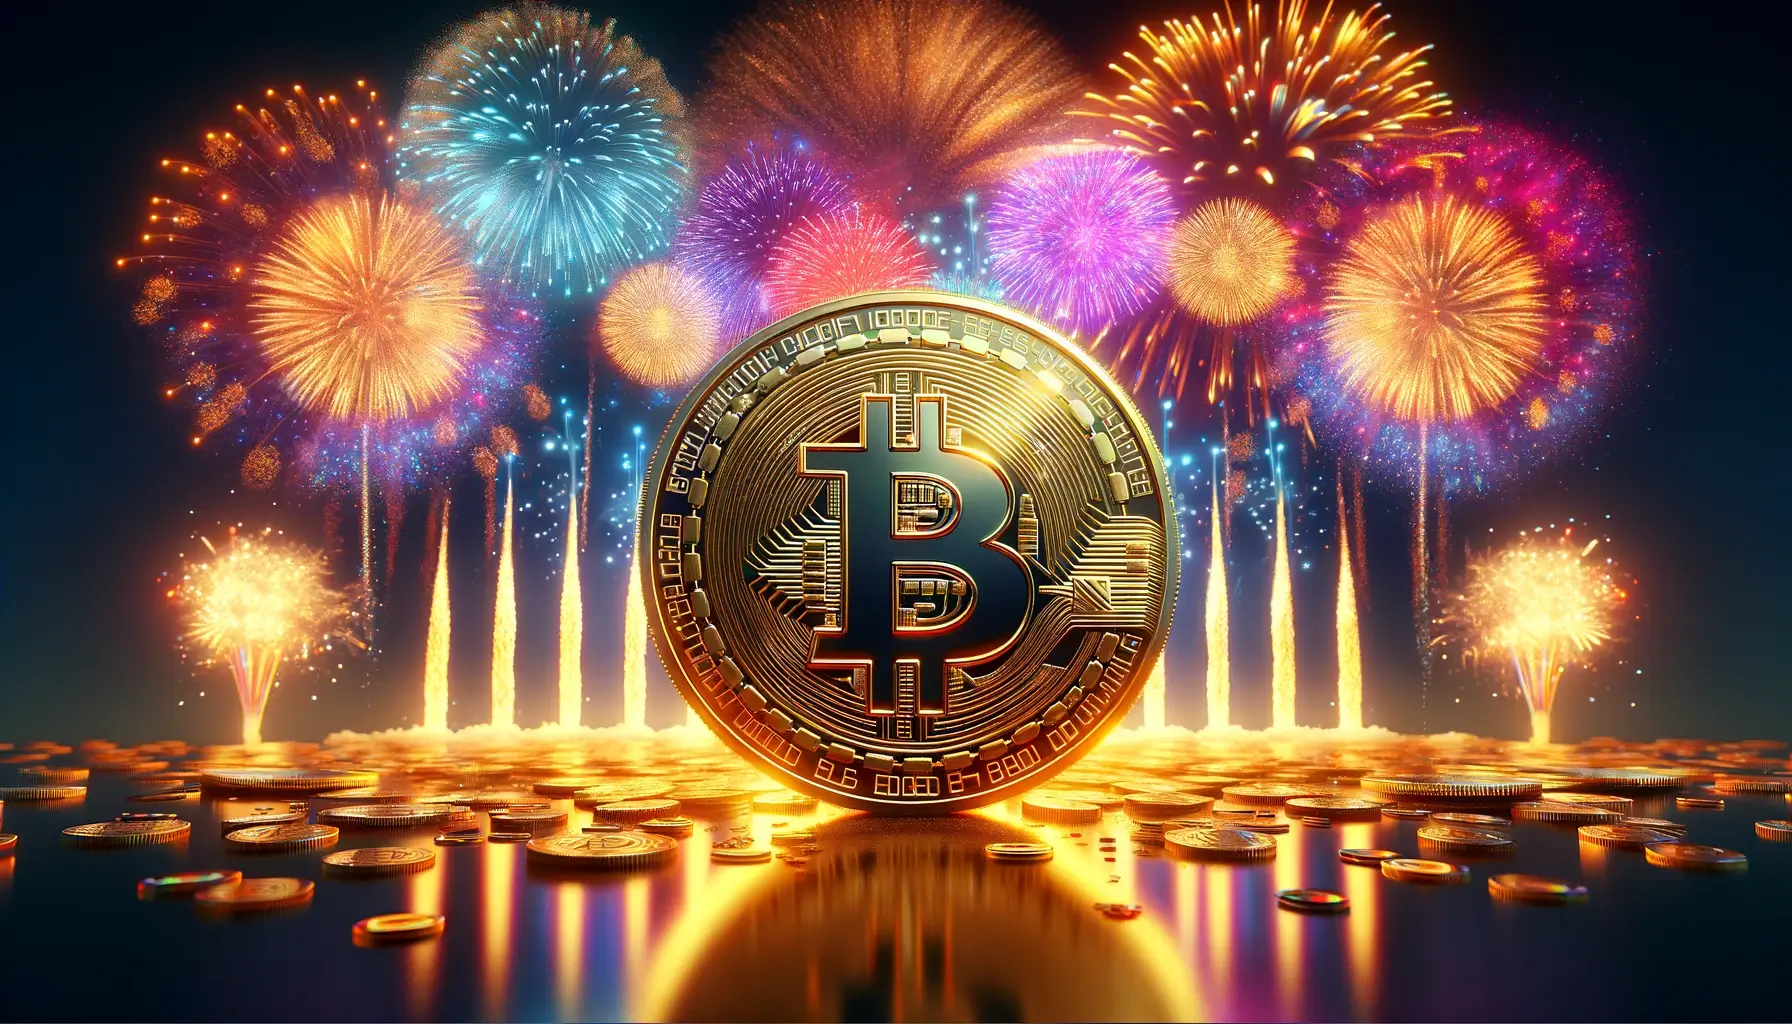 A-rectangular-blog-cover-image-featuring-a-gigantic-shining-gold-Bitcoin-coin-at-the-center